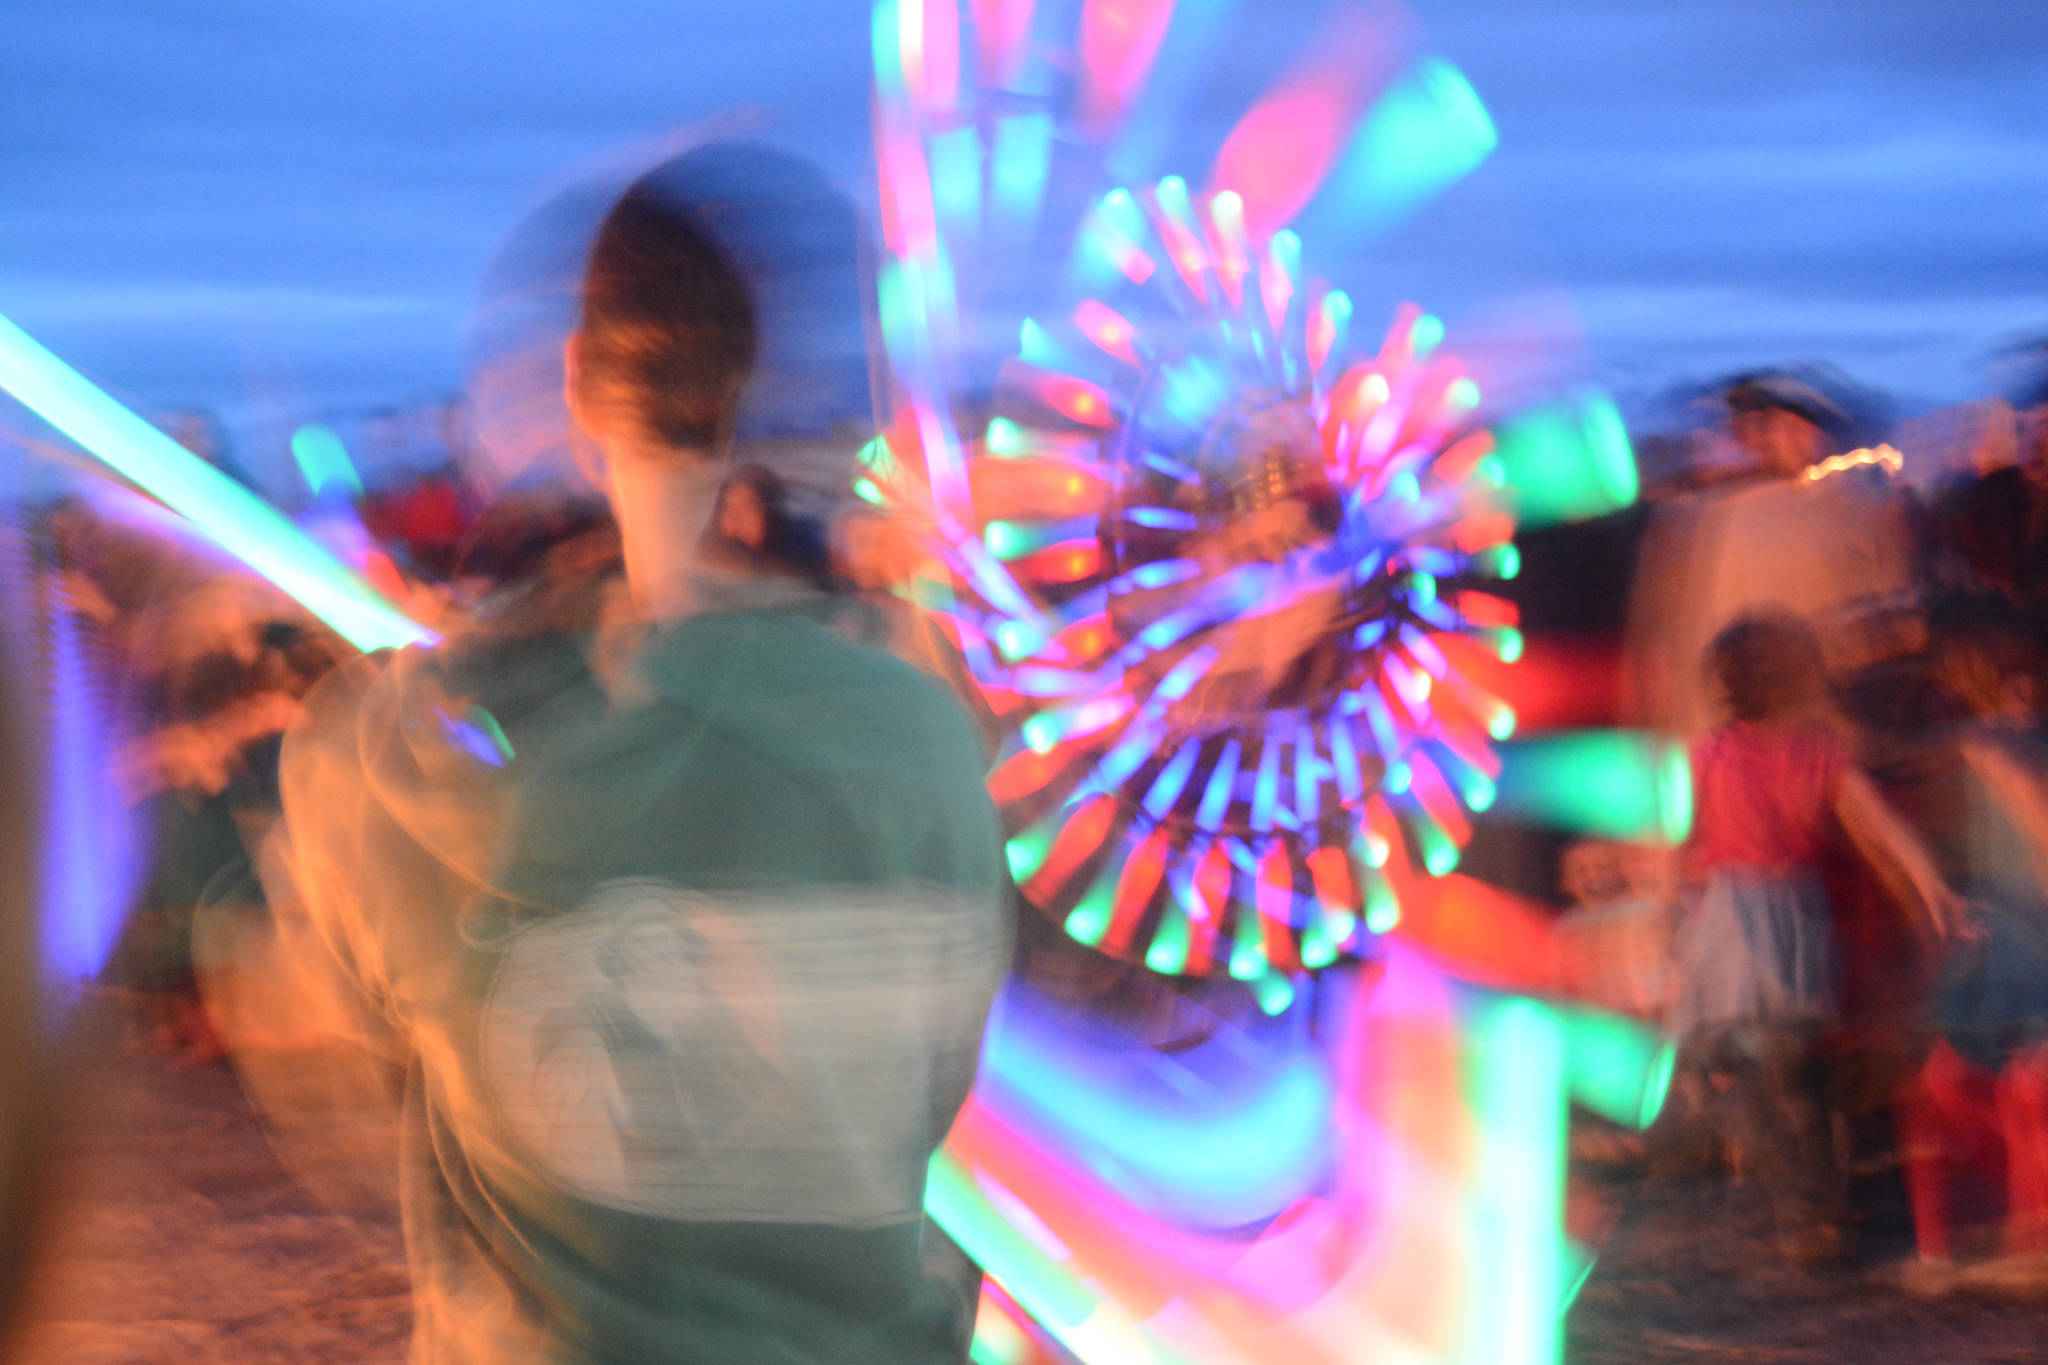 Revelers spin LED lighted poi at Shine, the 2017 Burning Basket, as it burns on Sunday, Sept. 10, 2017 at Mariner Park on the Homer Spit. (Photo by Michael Armstrong, Homer News)